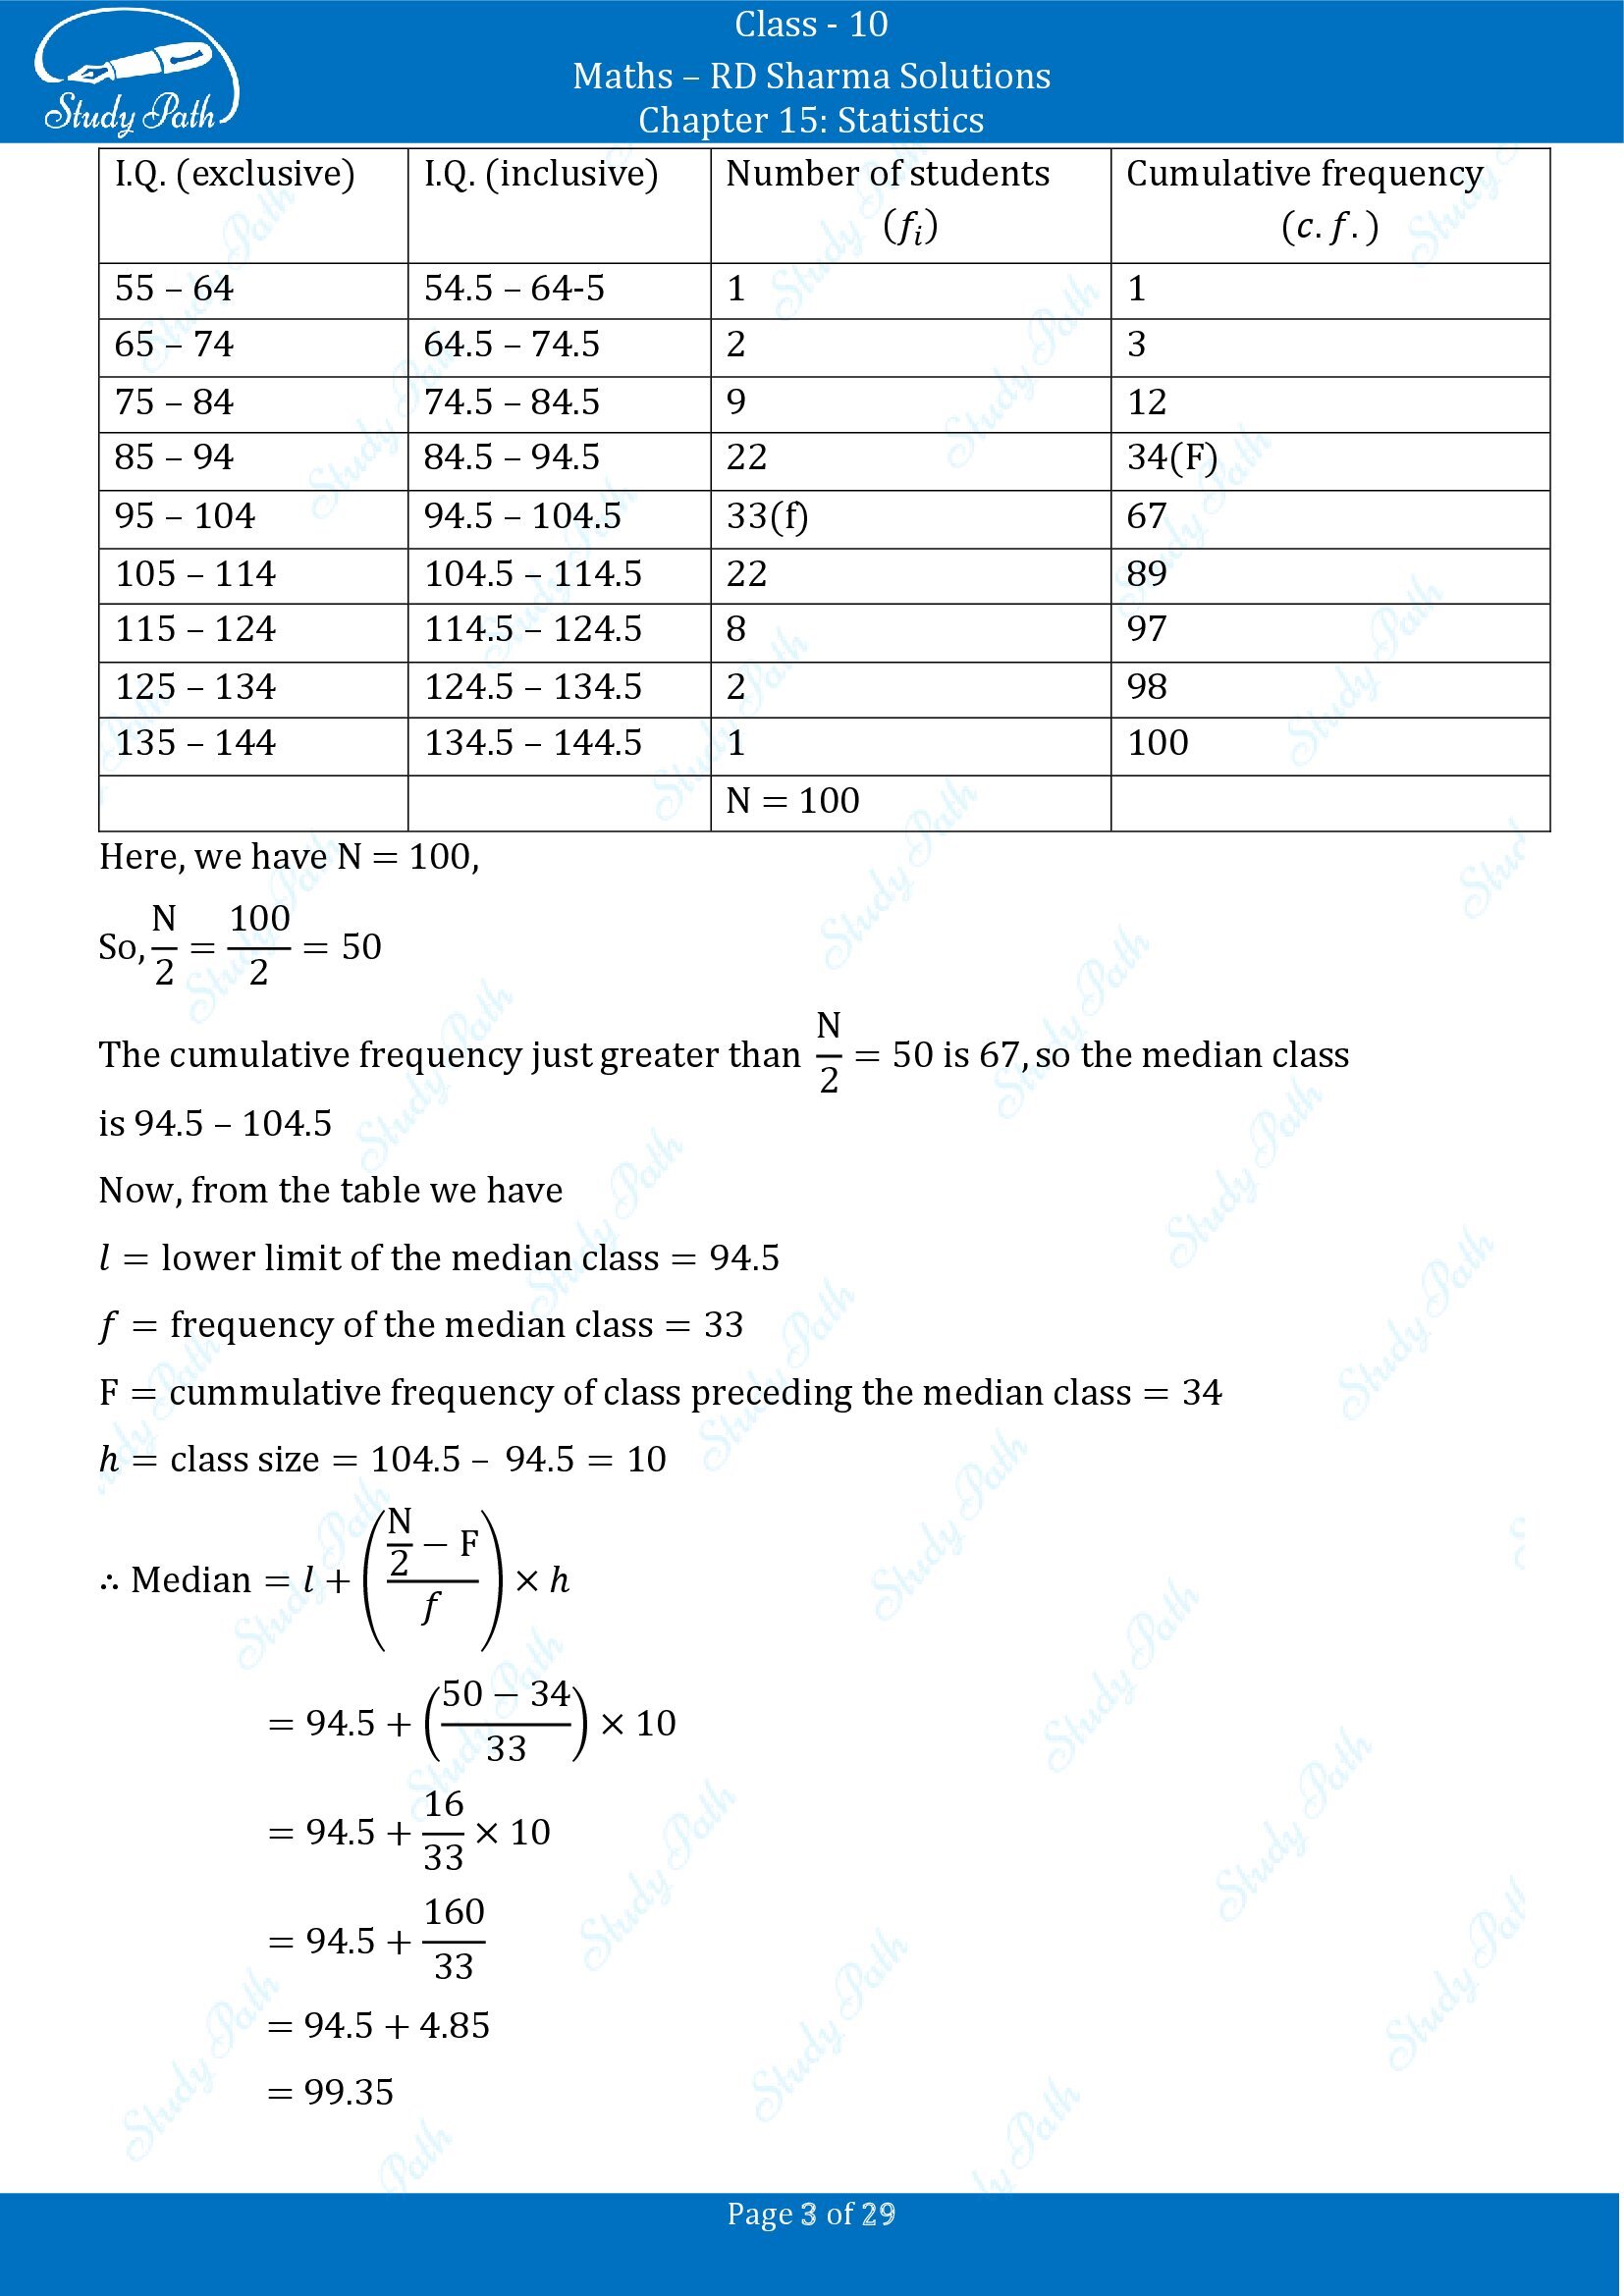 RD Sharma Solutions Class 10 Chapter 15 Statistics Exercise 15.4 00003